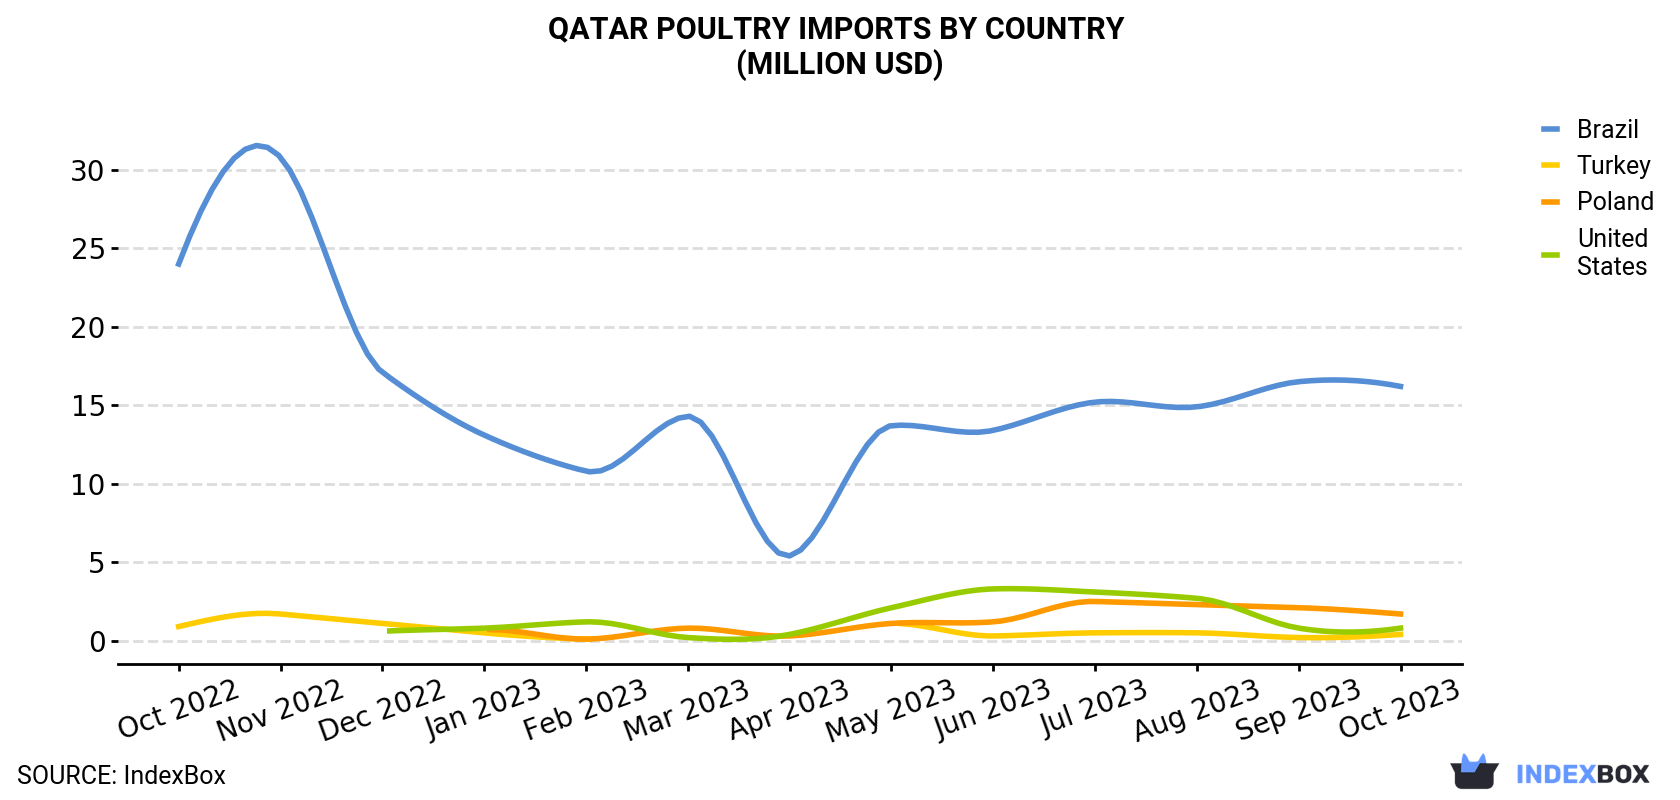 Qatar Poultry Imports By Country (Million USD)